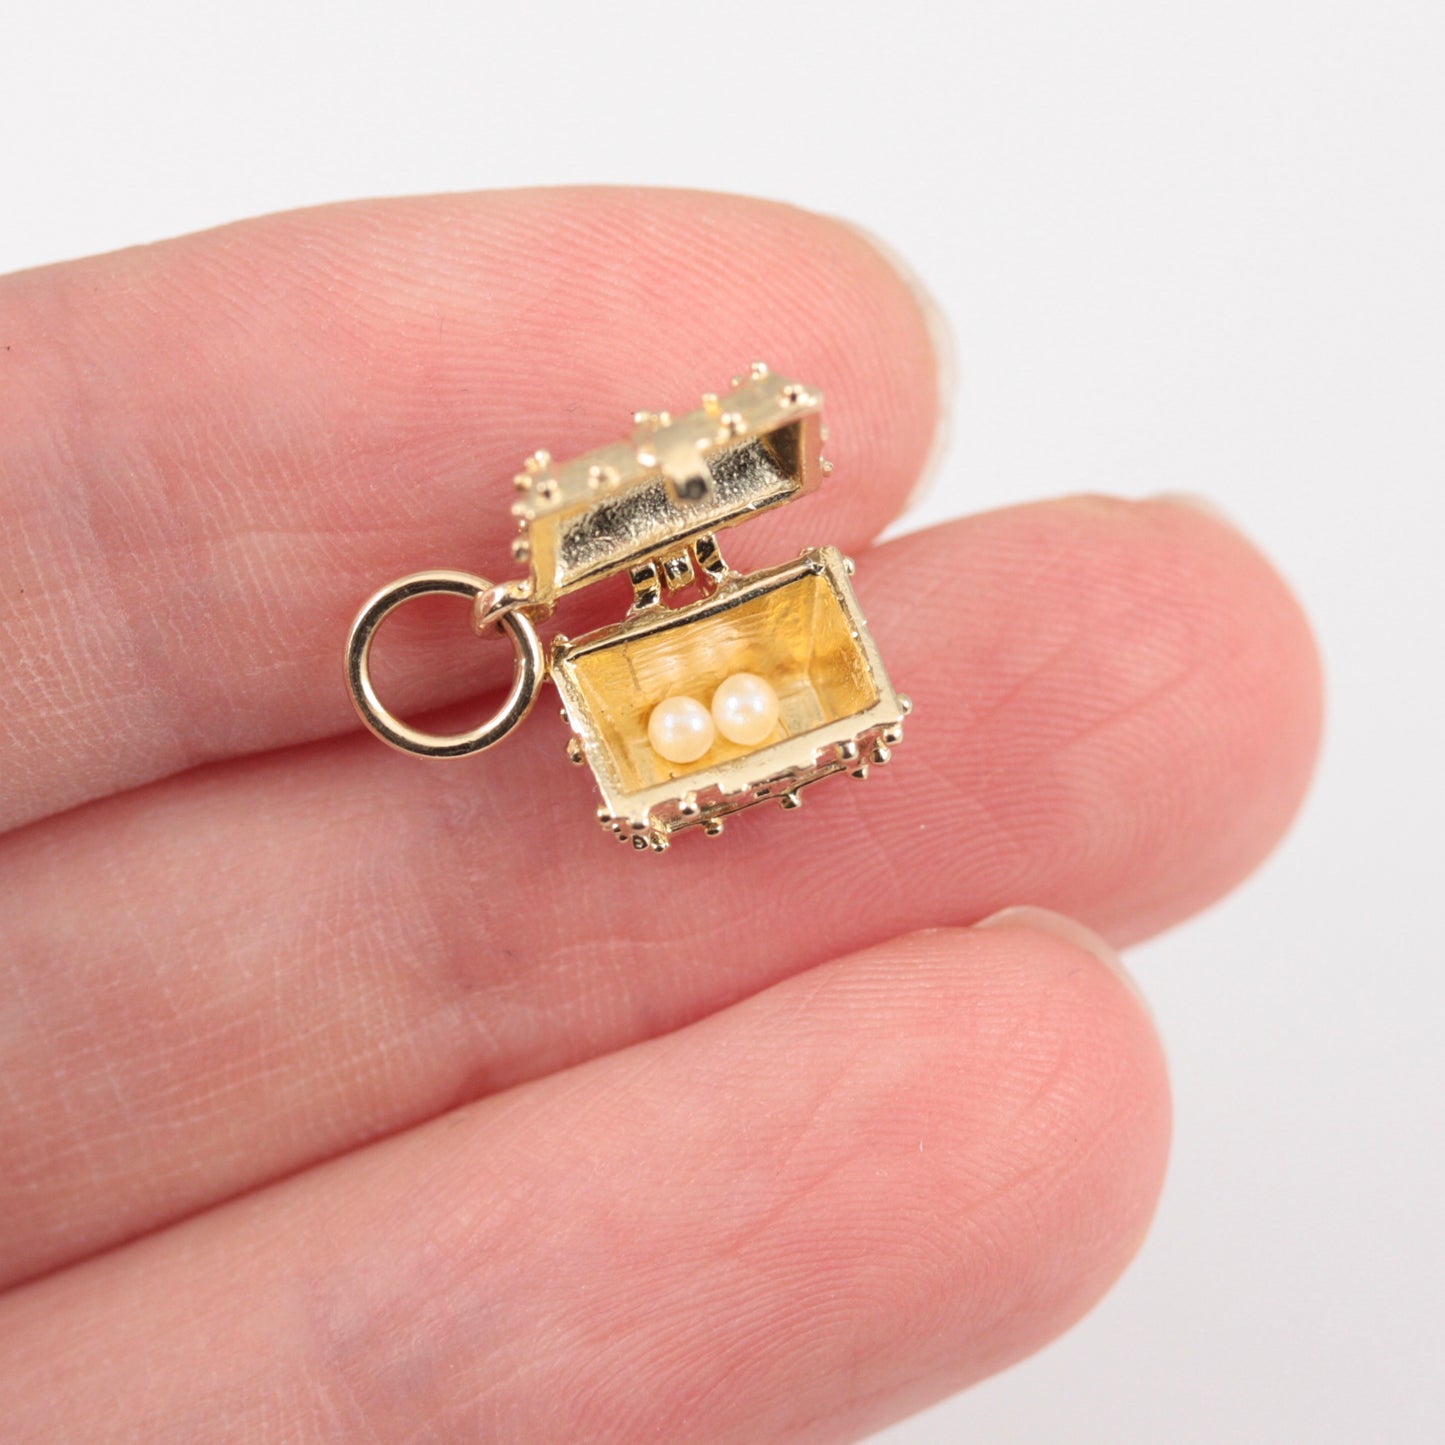 vintage 9ct gold treasure chest charm with pearls inside